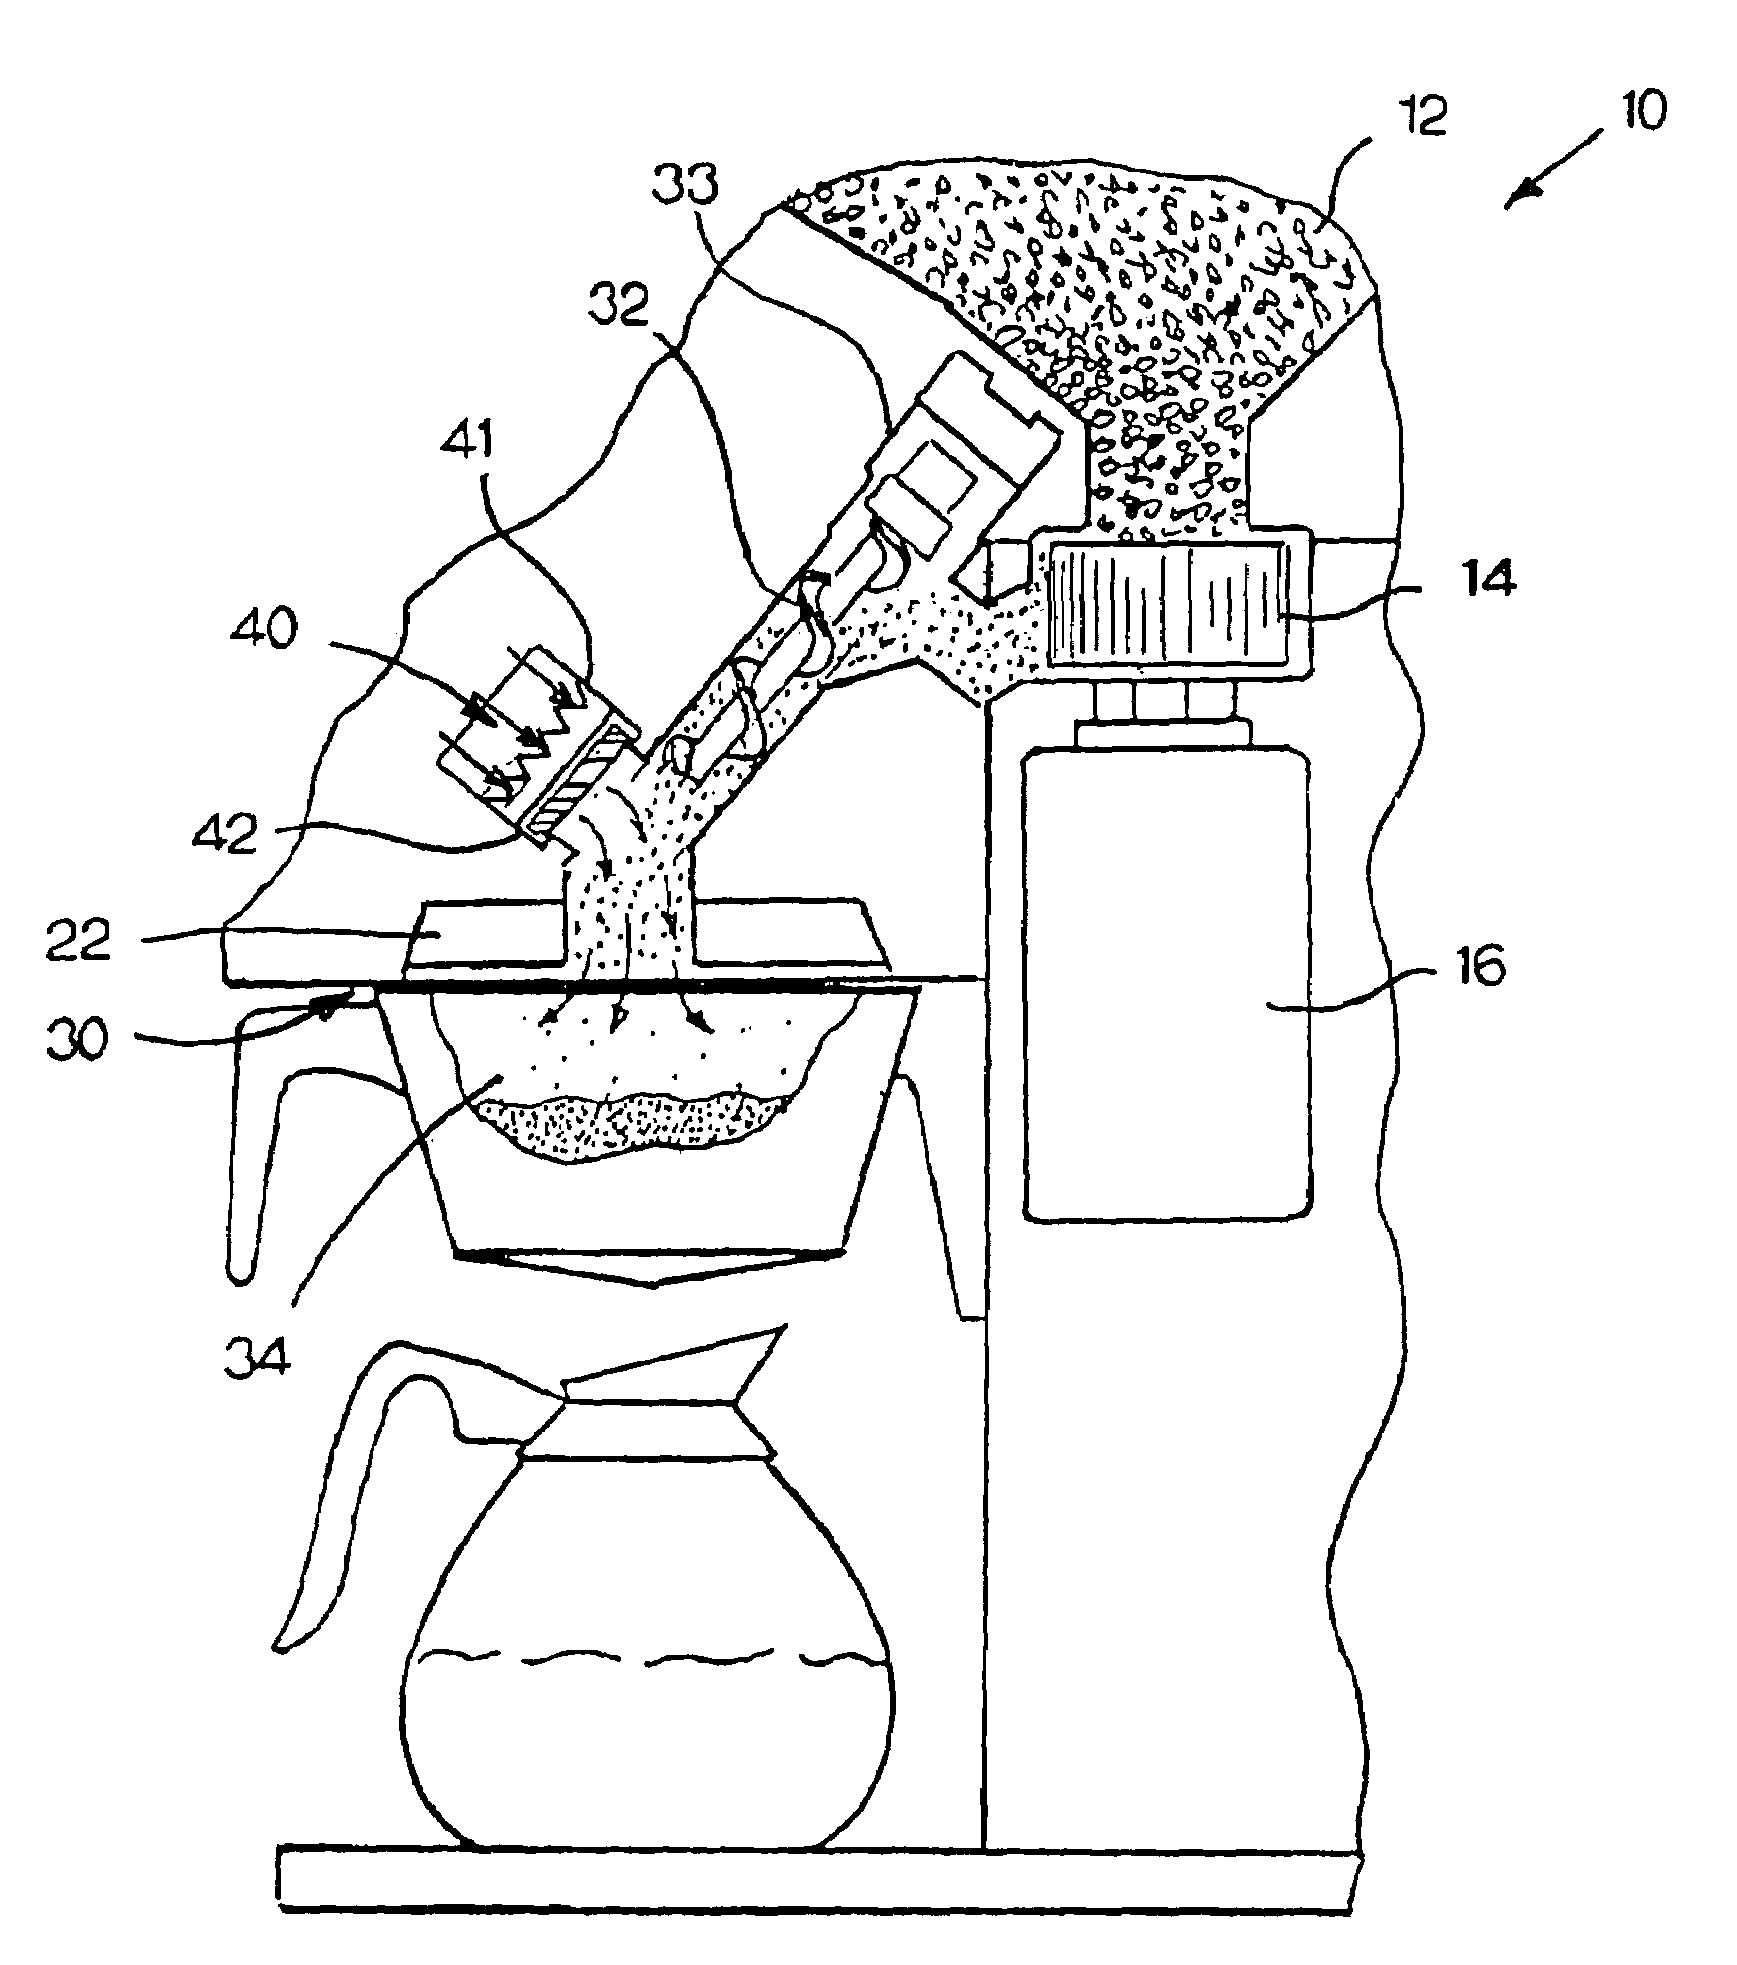 Combination grinder and brewer